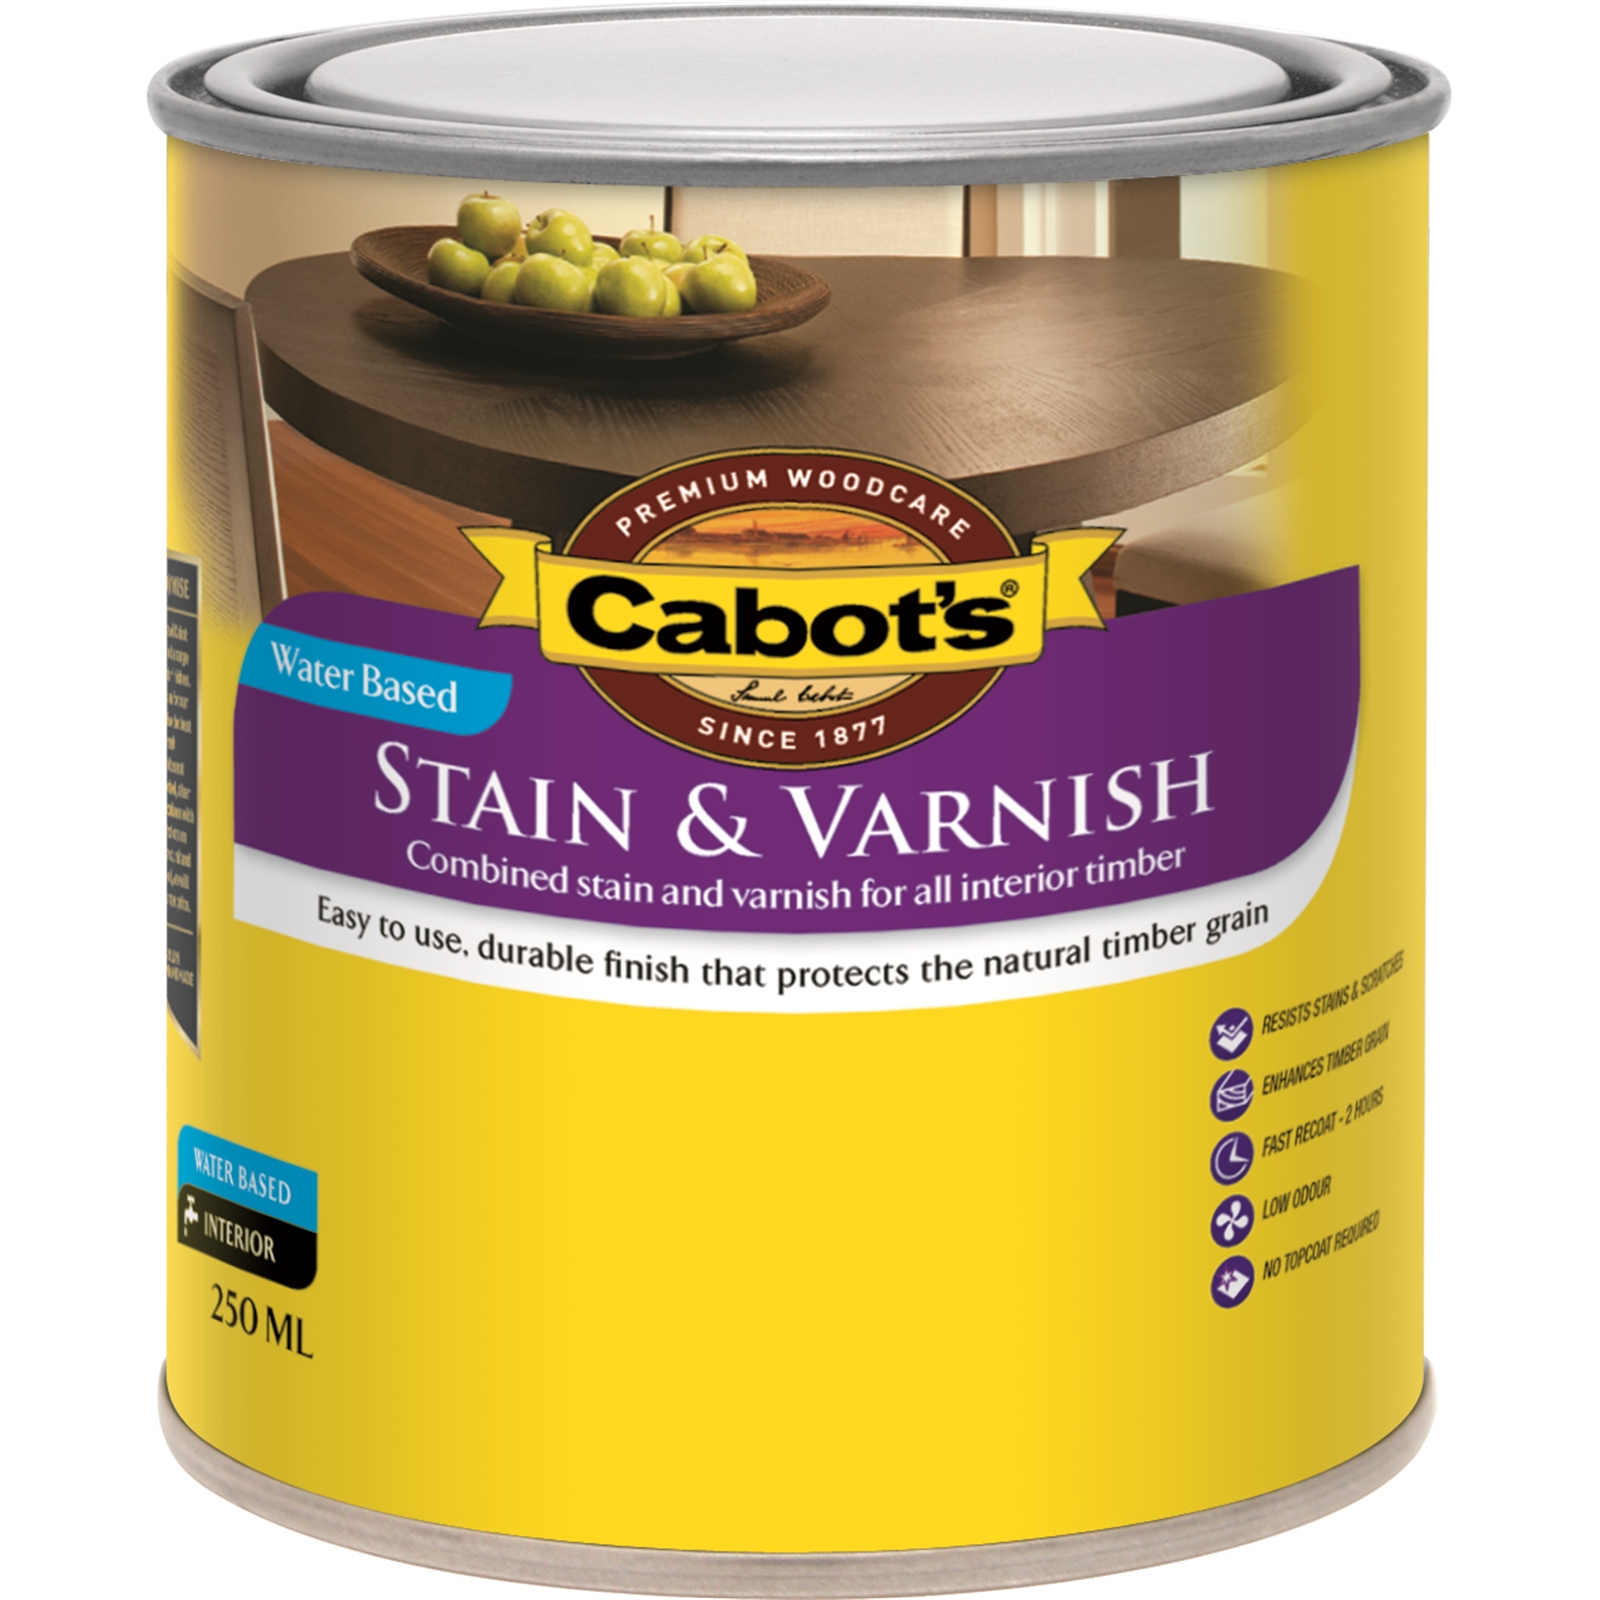 Cabot's 250ml Gloss Walnut Water Based Stain and Varnish